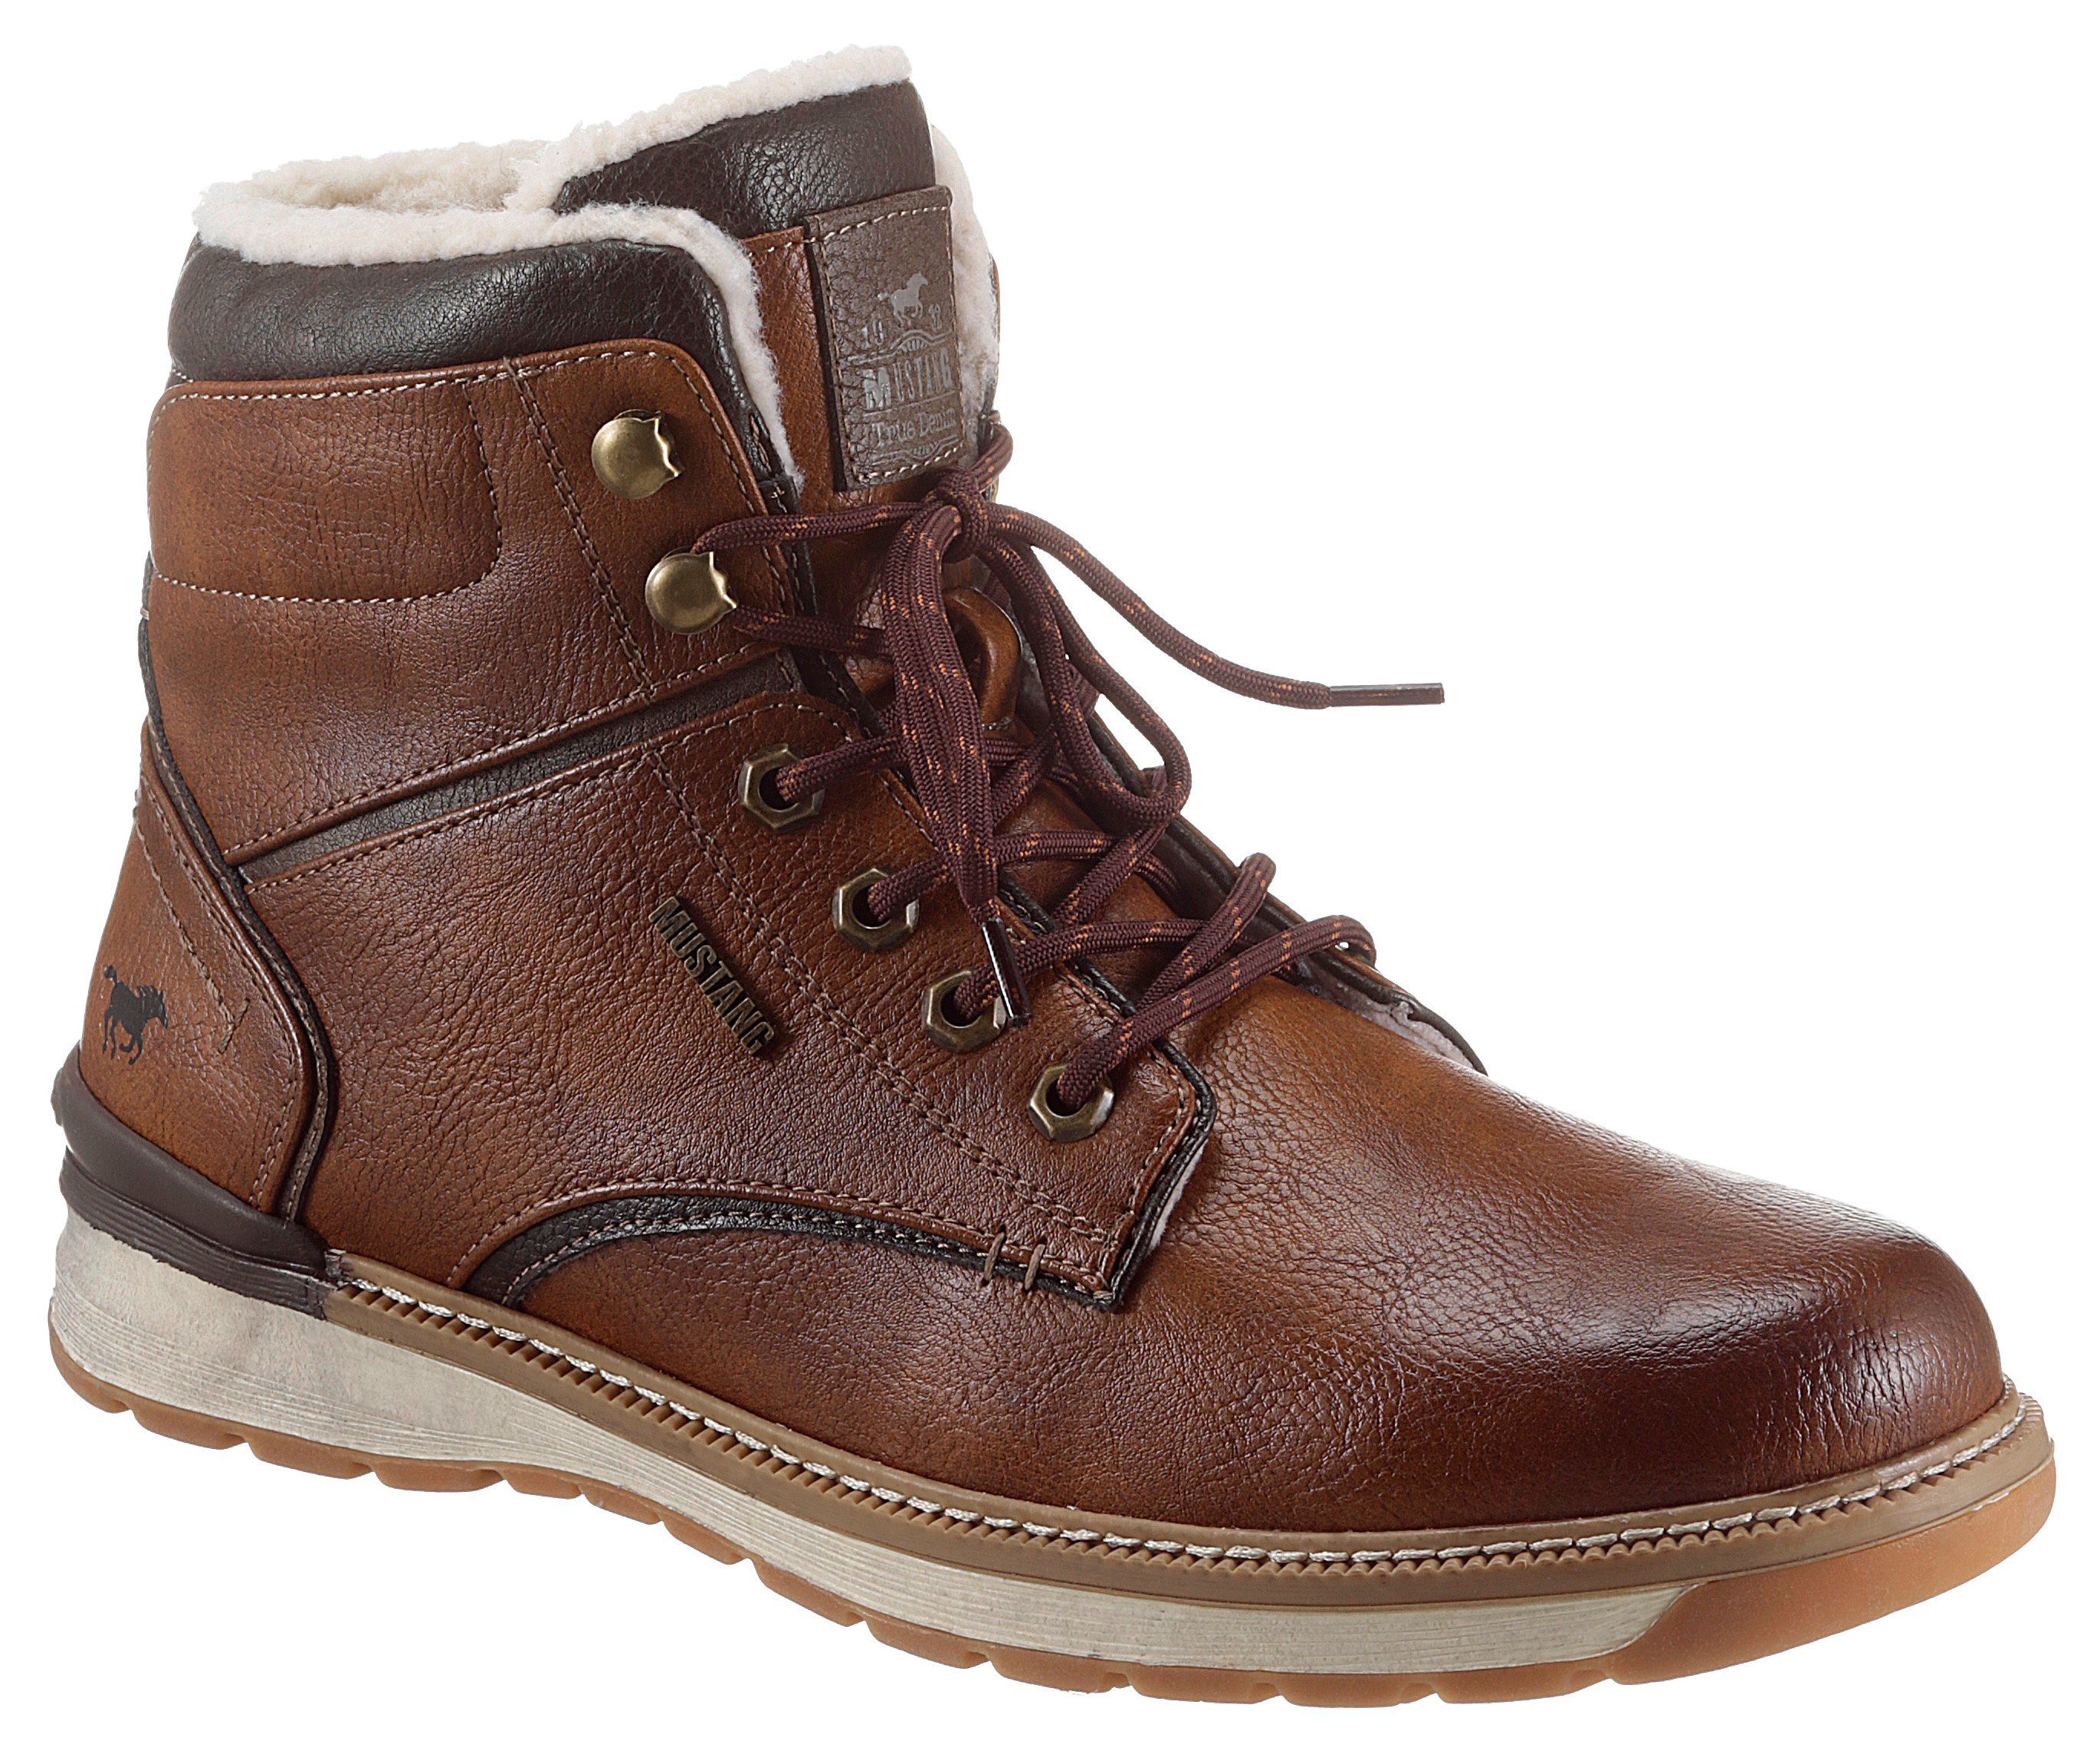 Mustang Shoes Schnürboots mit cognac-used gepolsterter Innensohle